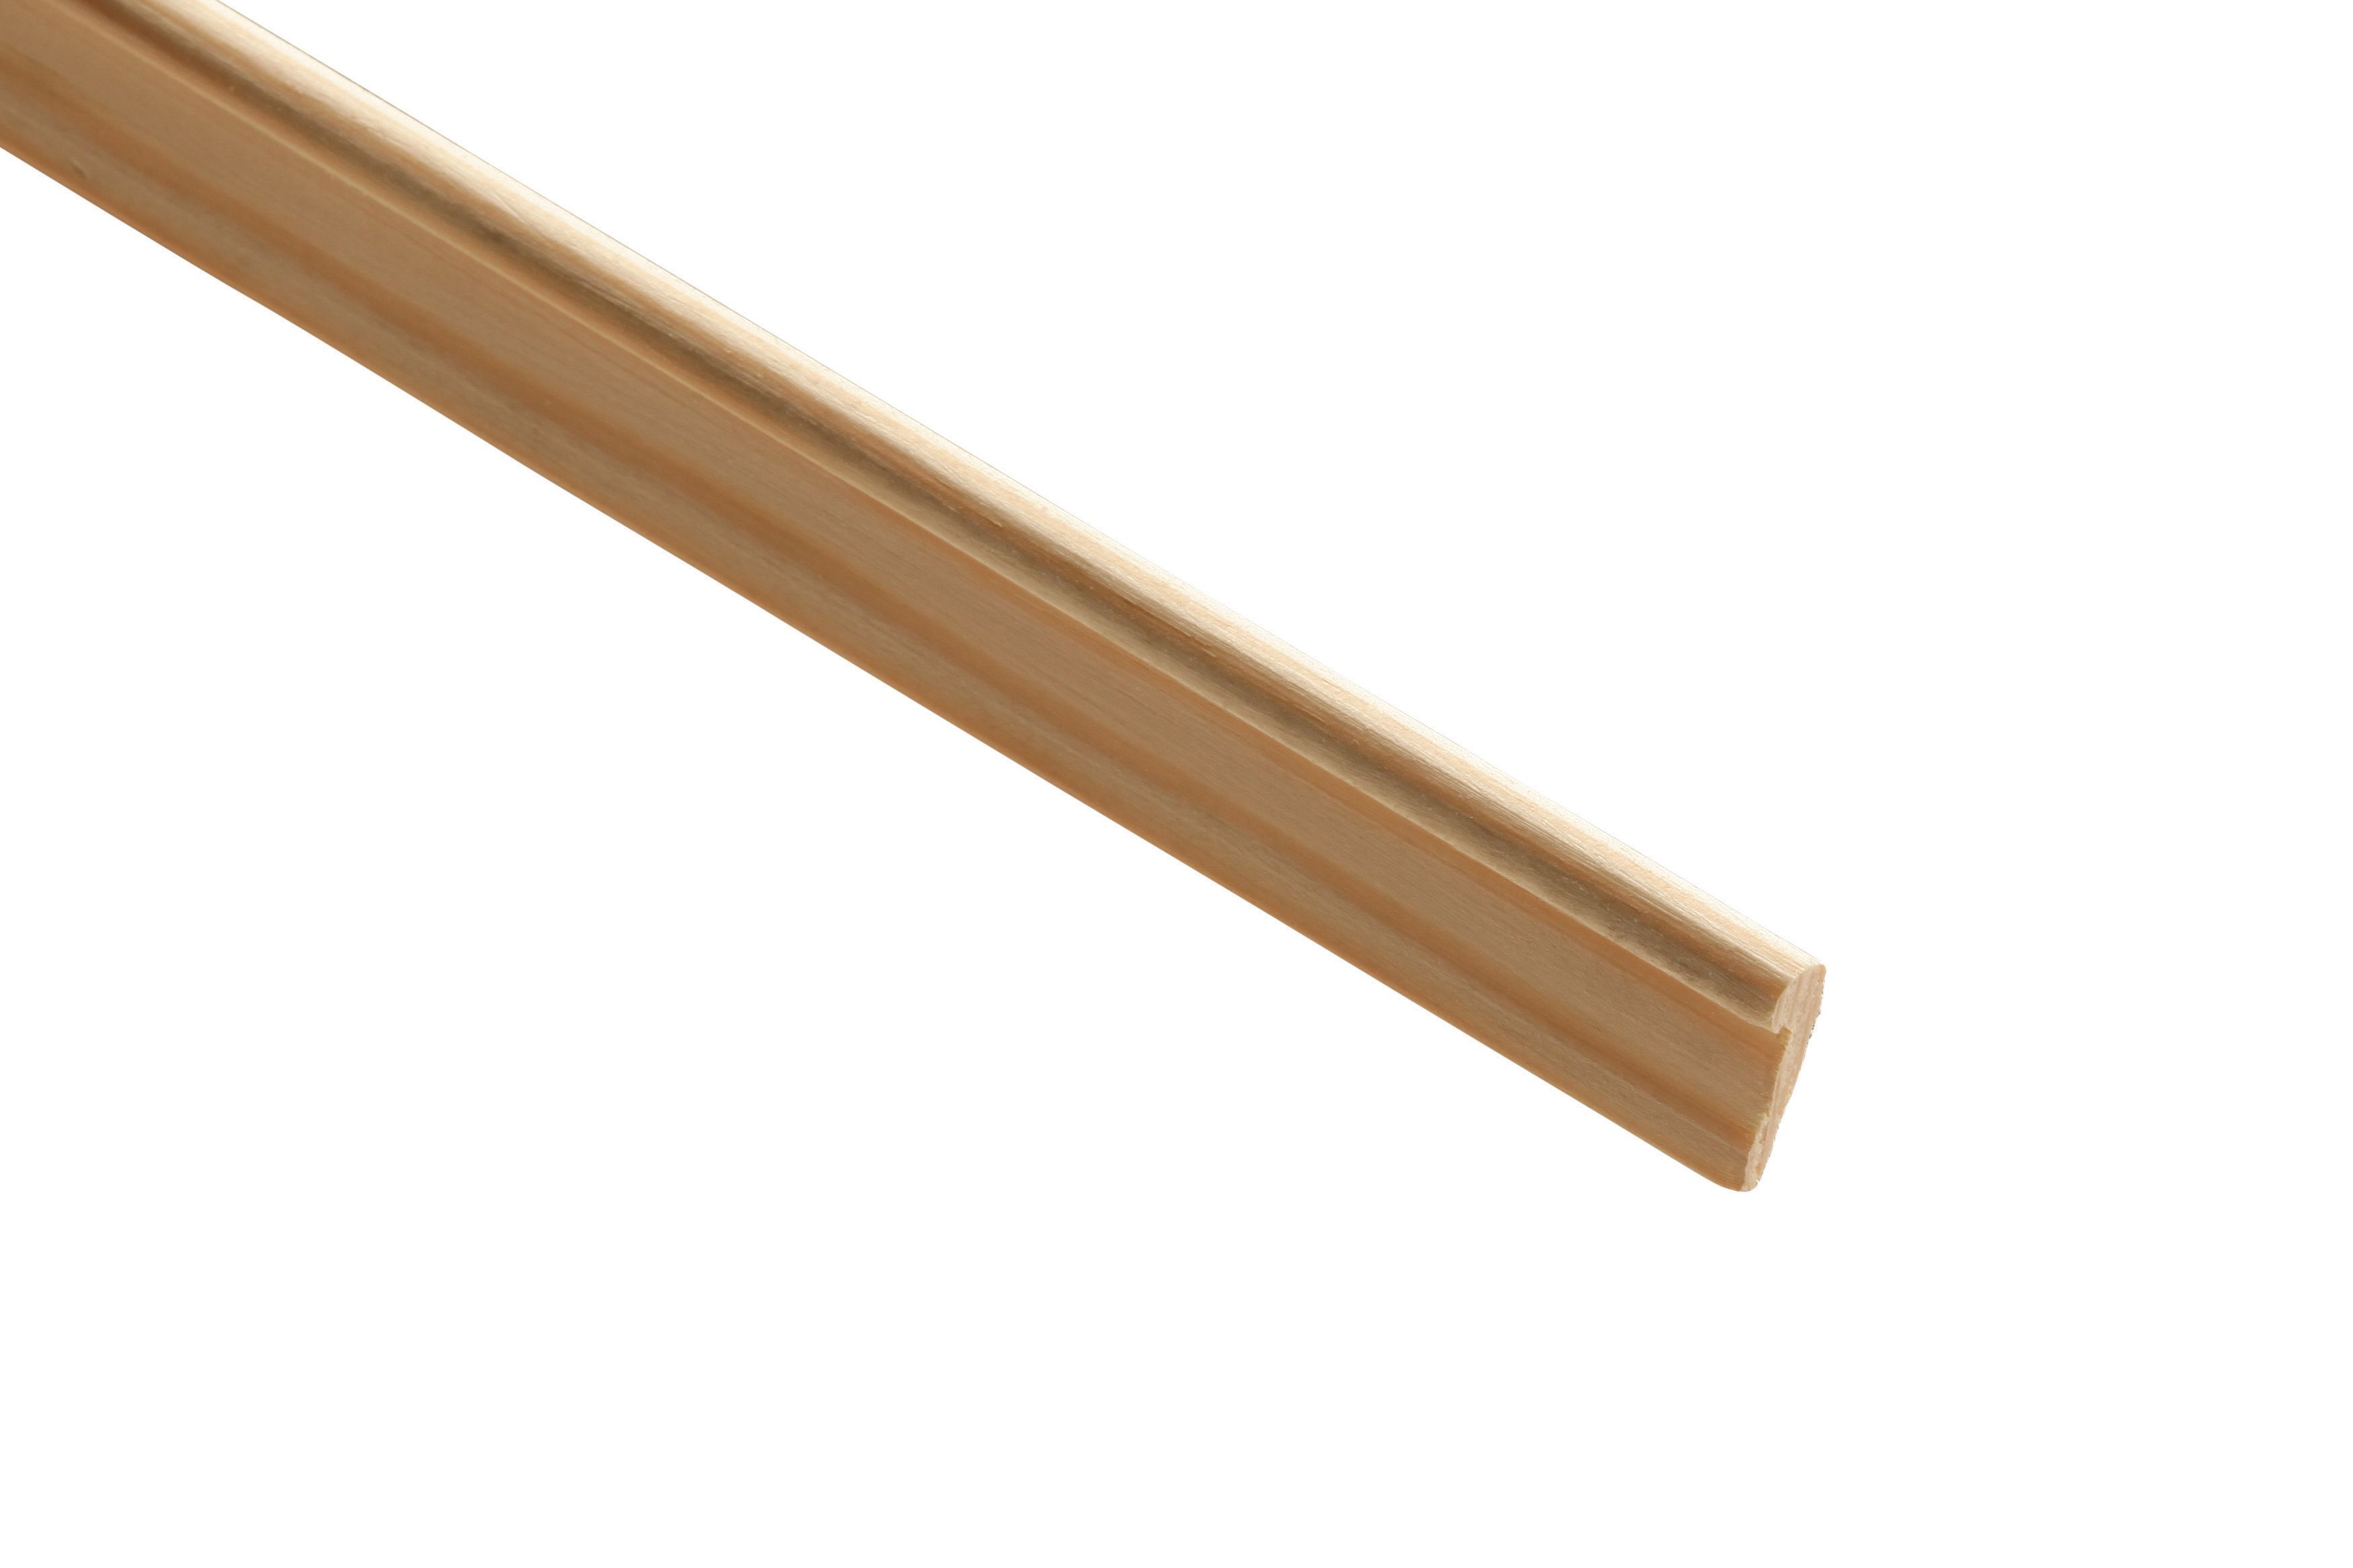 Image of Wickes Pine Hockey Stick Moulding - 8 x 26 x 2400mm